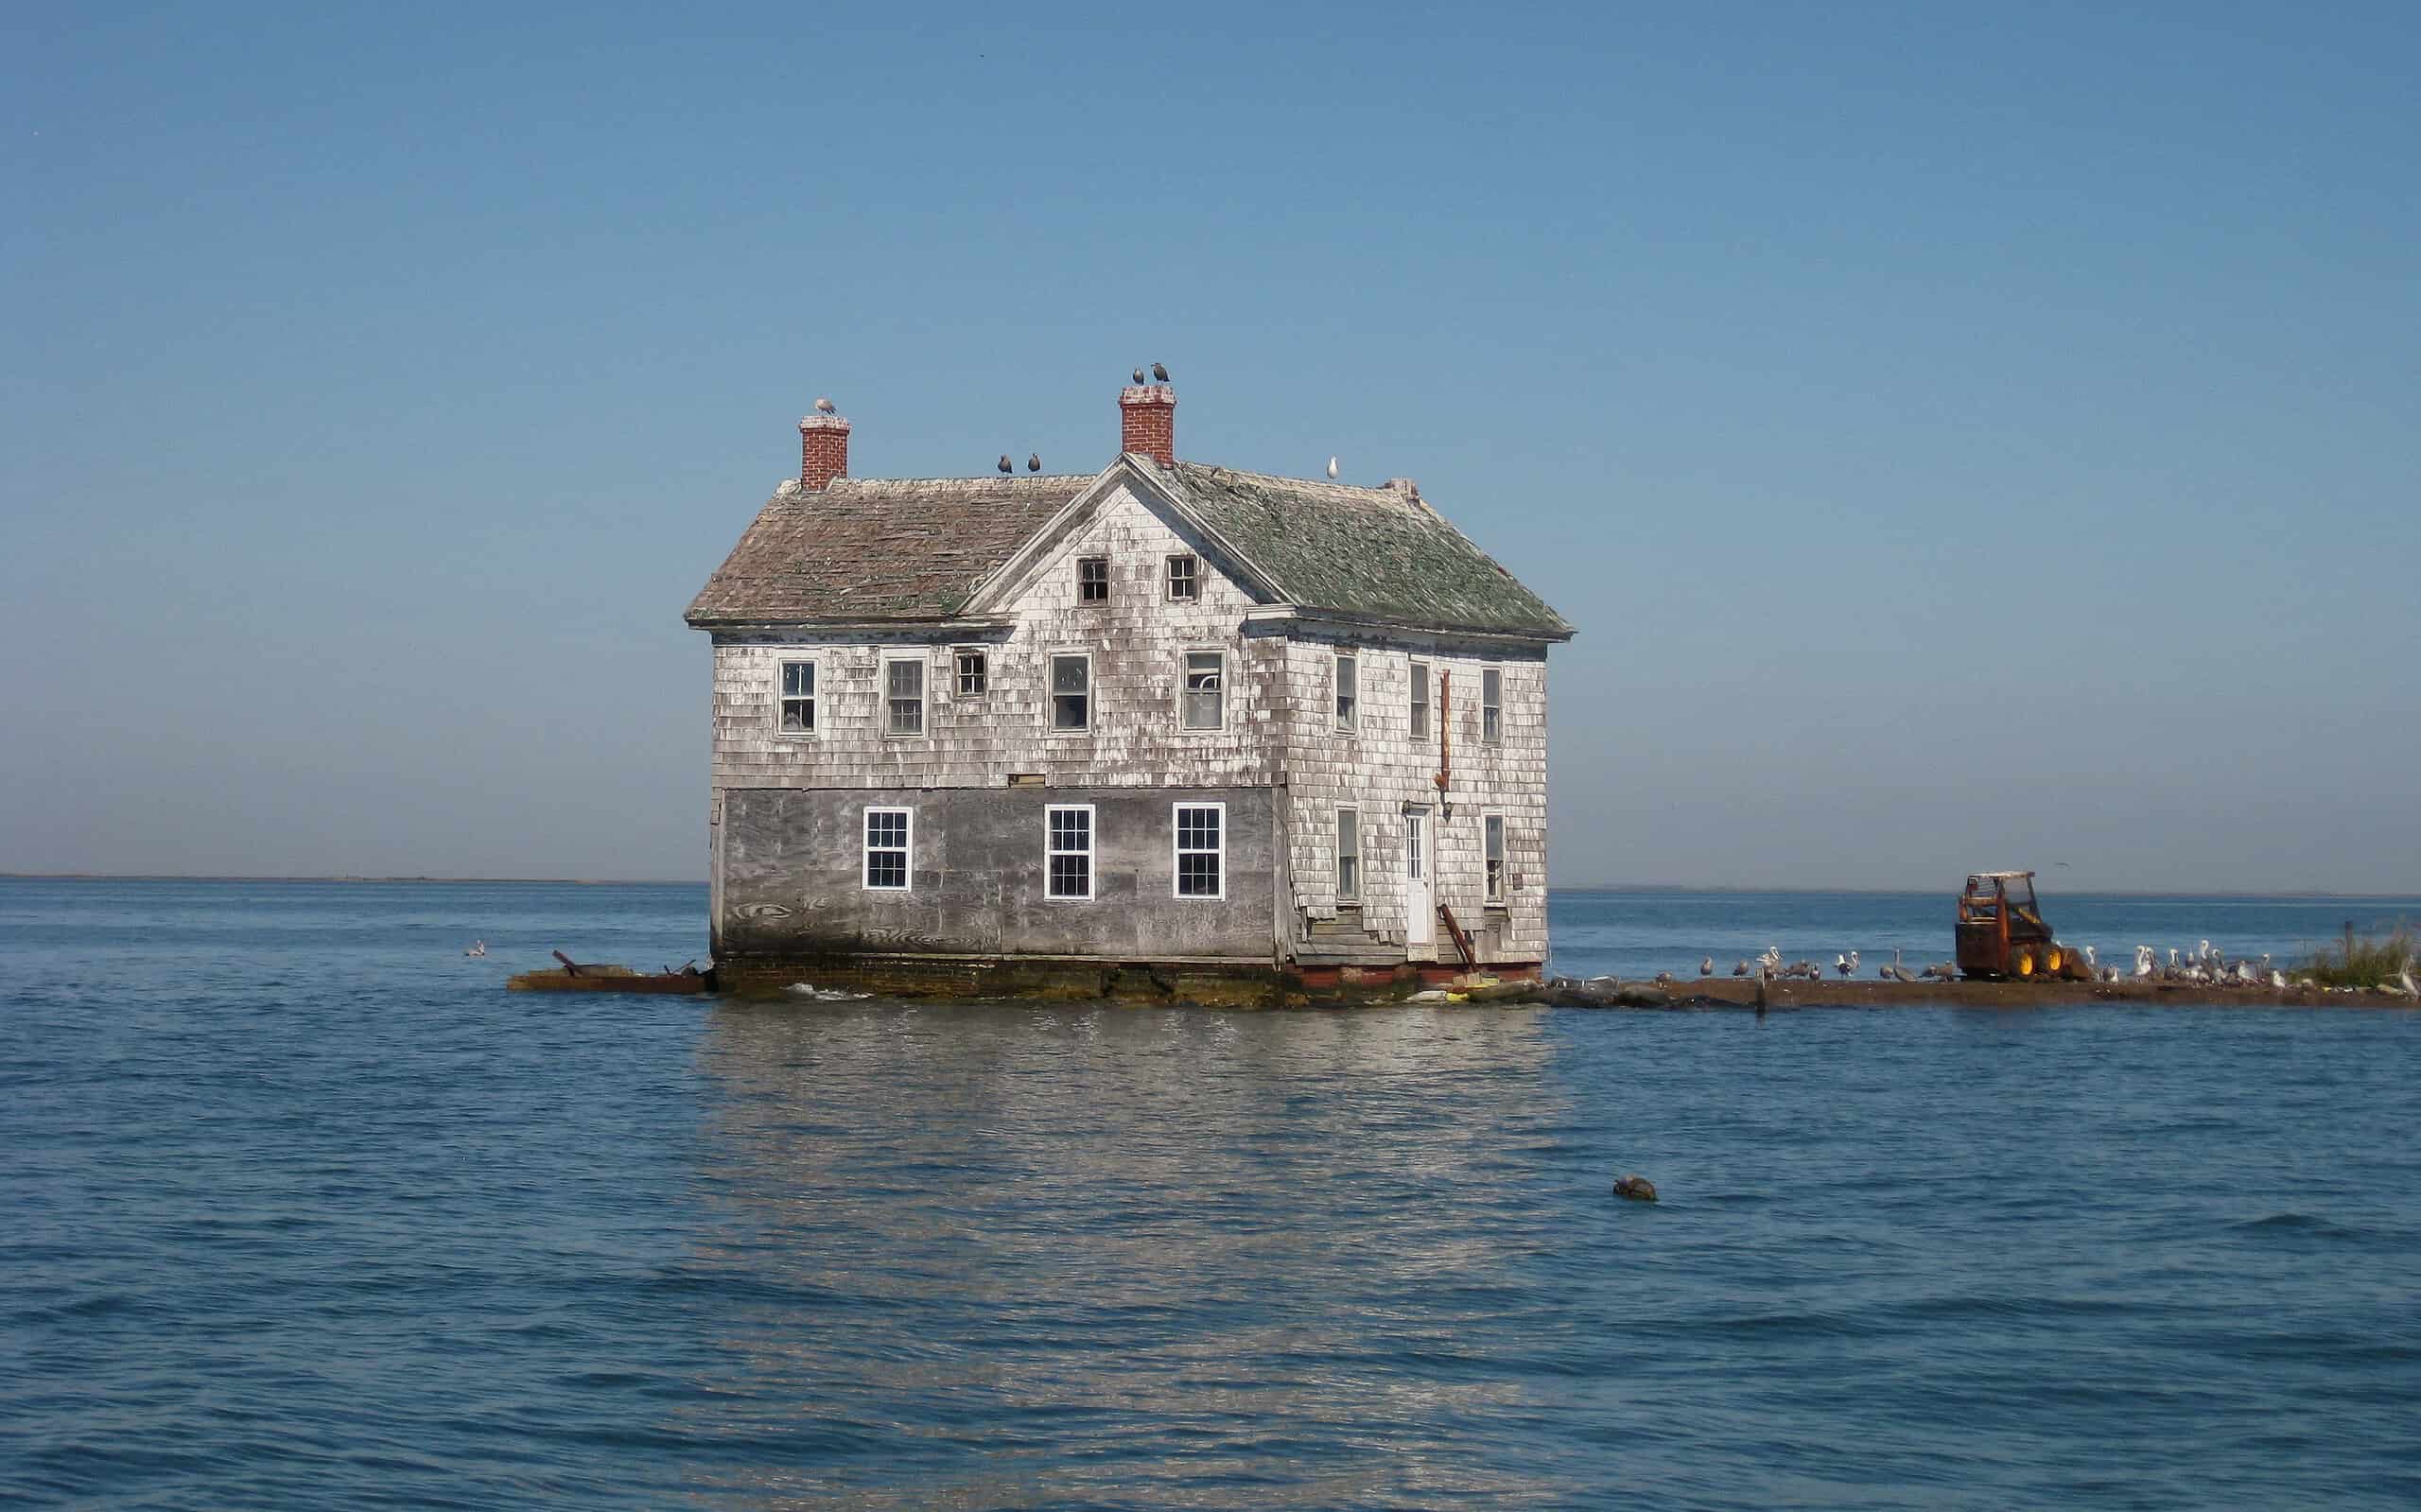 The last house on Holland Island in the Chesapeake Bay as it stood in October 2009. This house fell into the bay in October 2010.